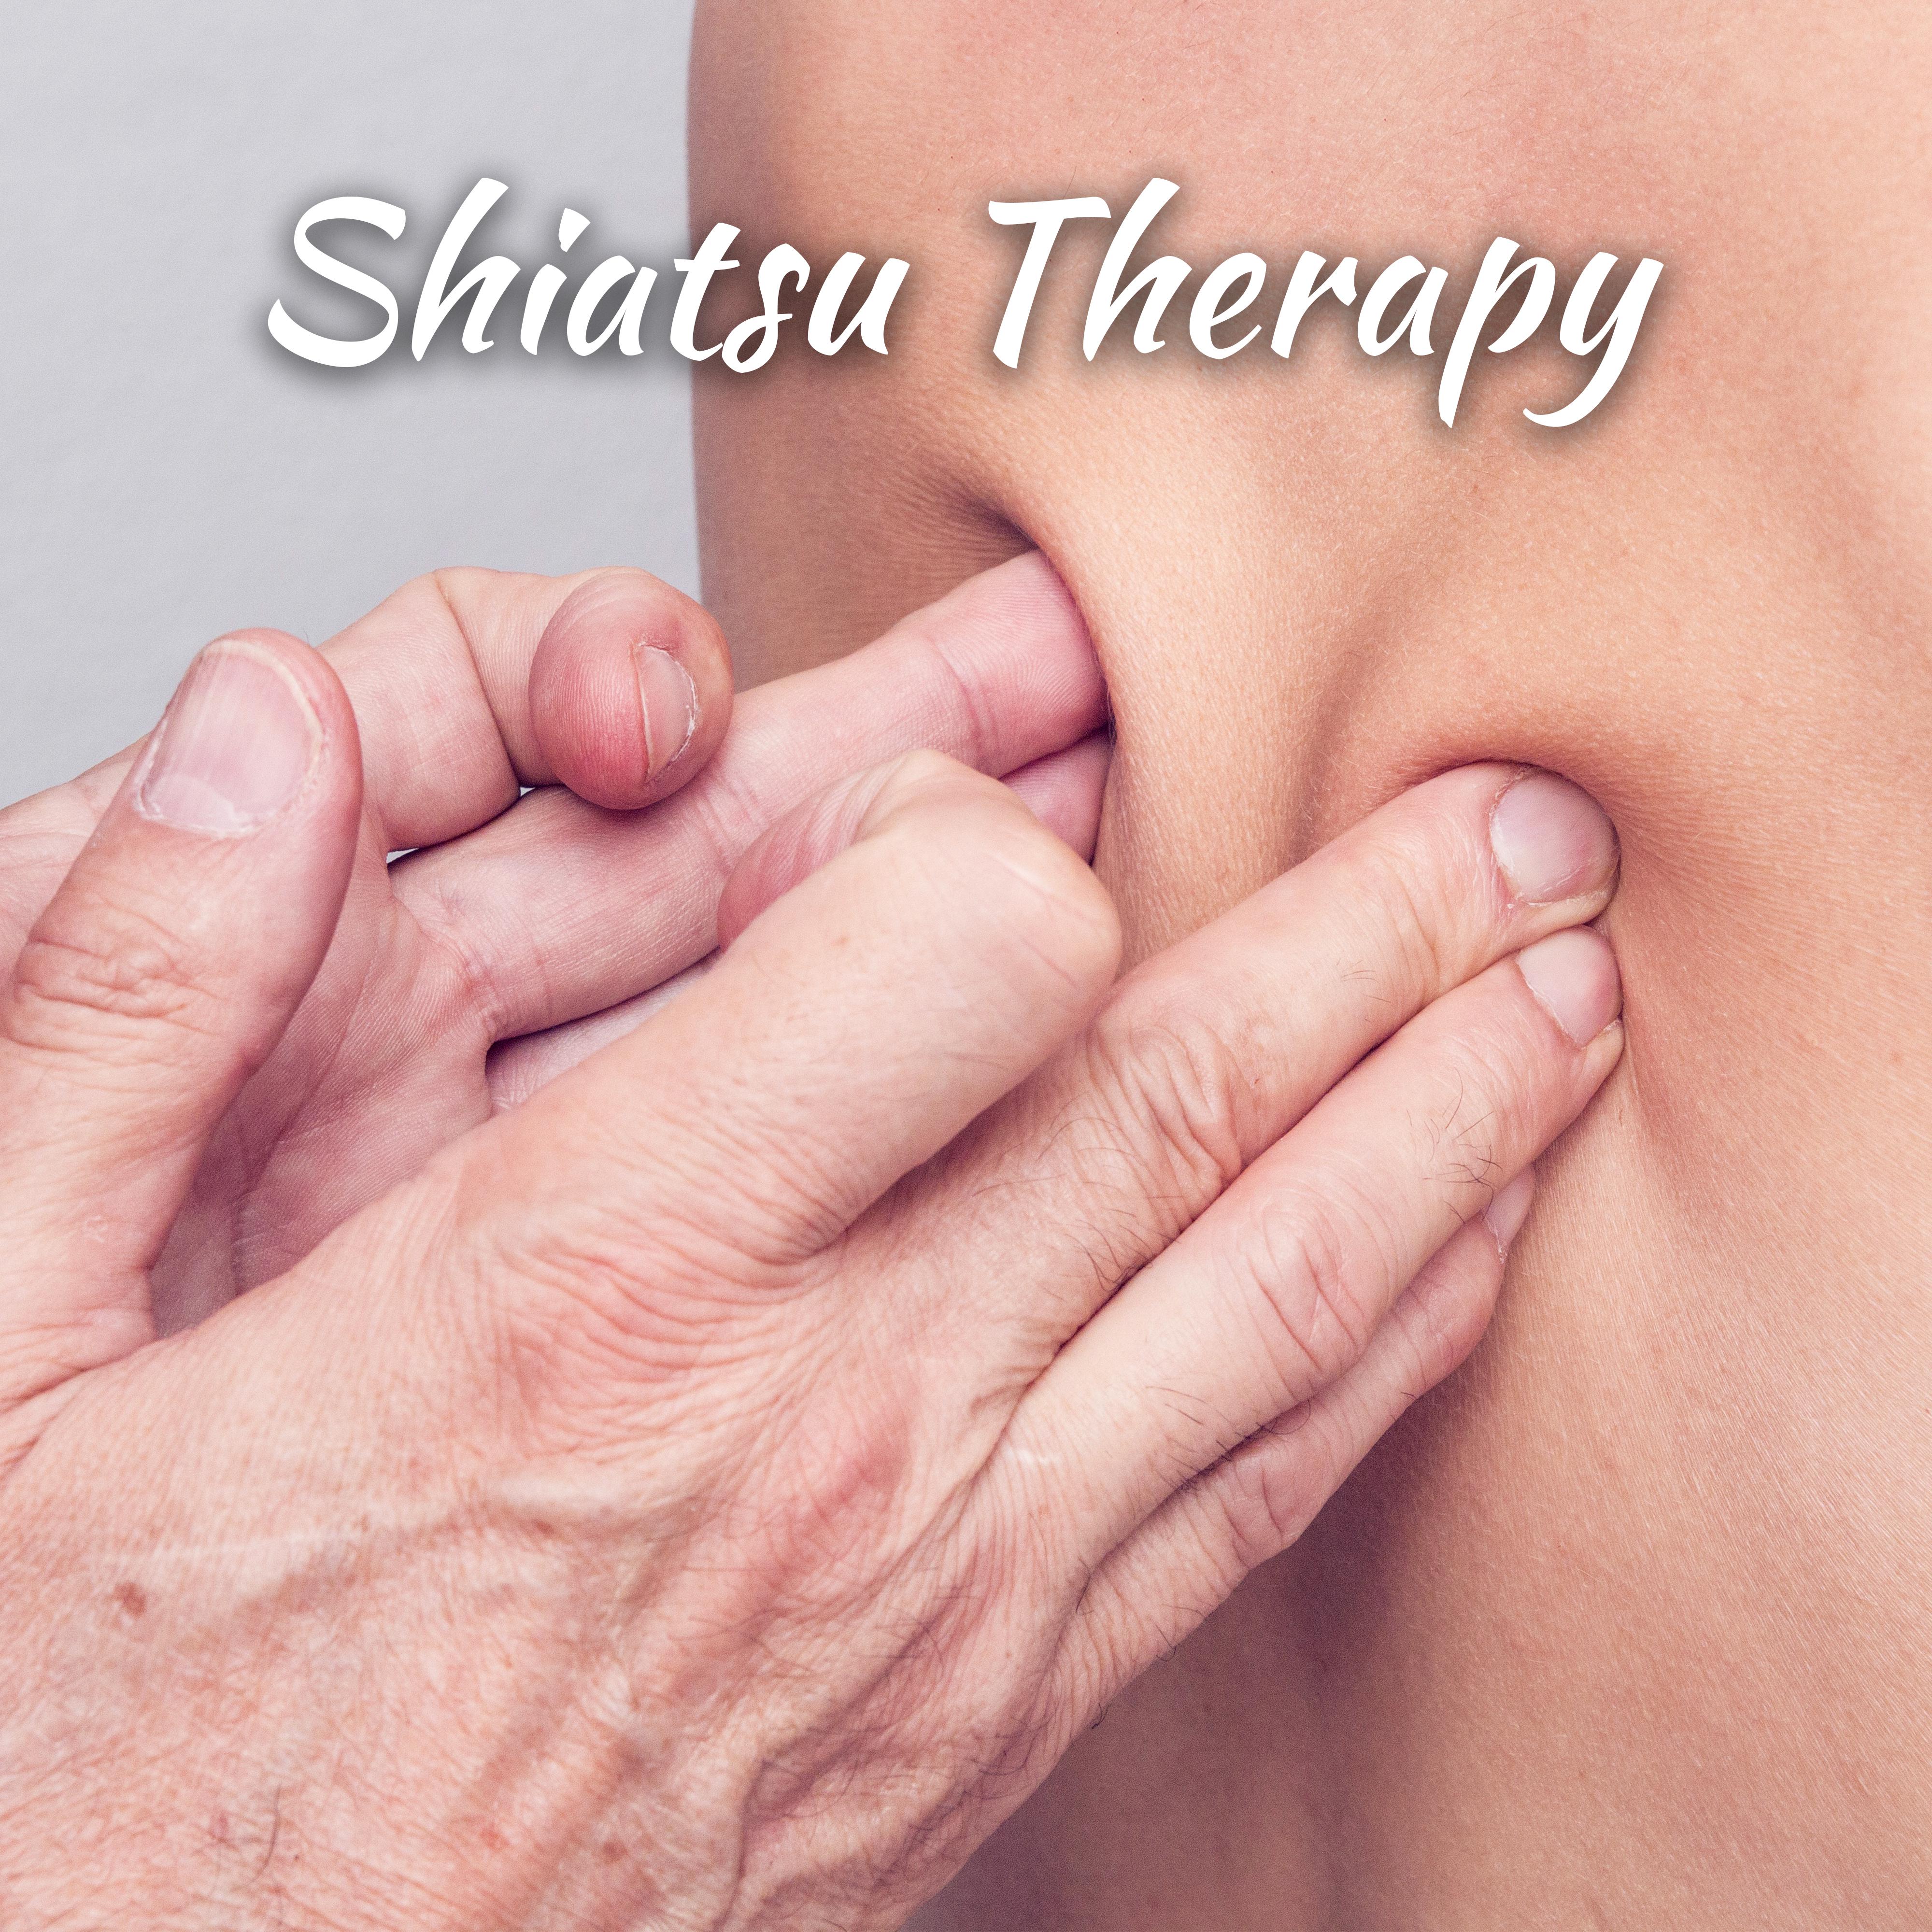 Shiatsu Therapy  New Age, Music for Massage Therapy, Spa, Wellness Relaxation